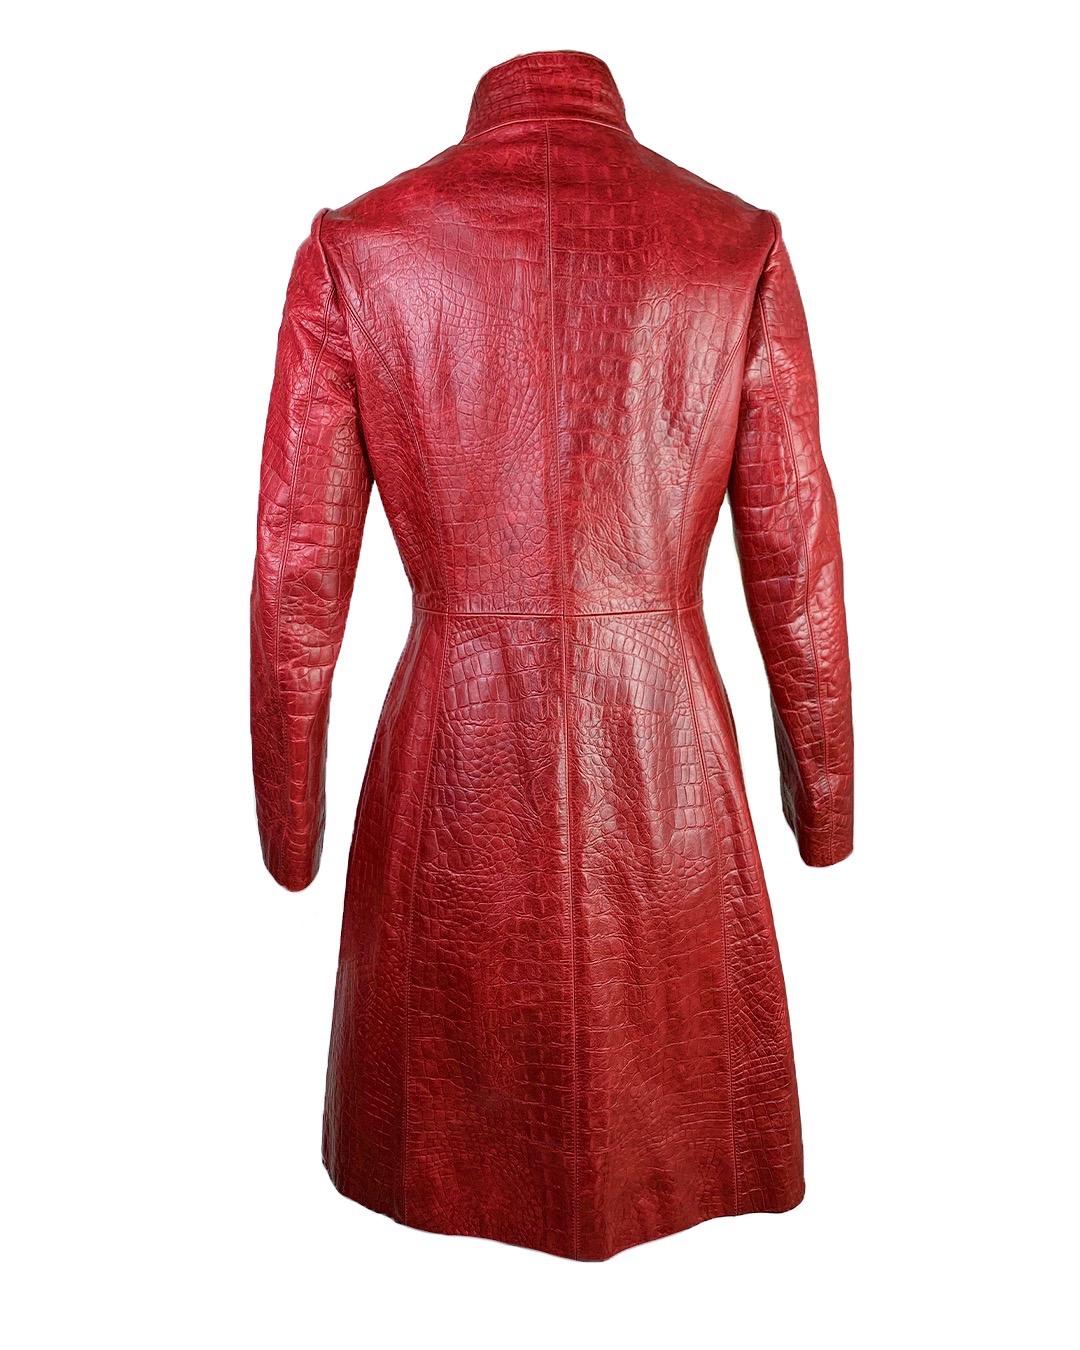 This fabulous Roberto Cavalli Fall 2000 leather coat in a belted runway versio was infamously seen on Mary J Blidge in her “Rainy dayz” music video as well as on the cover of “No more drama” album!

The coat has a practical closure on button and no